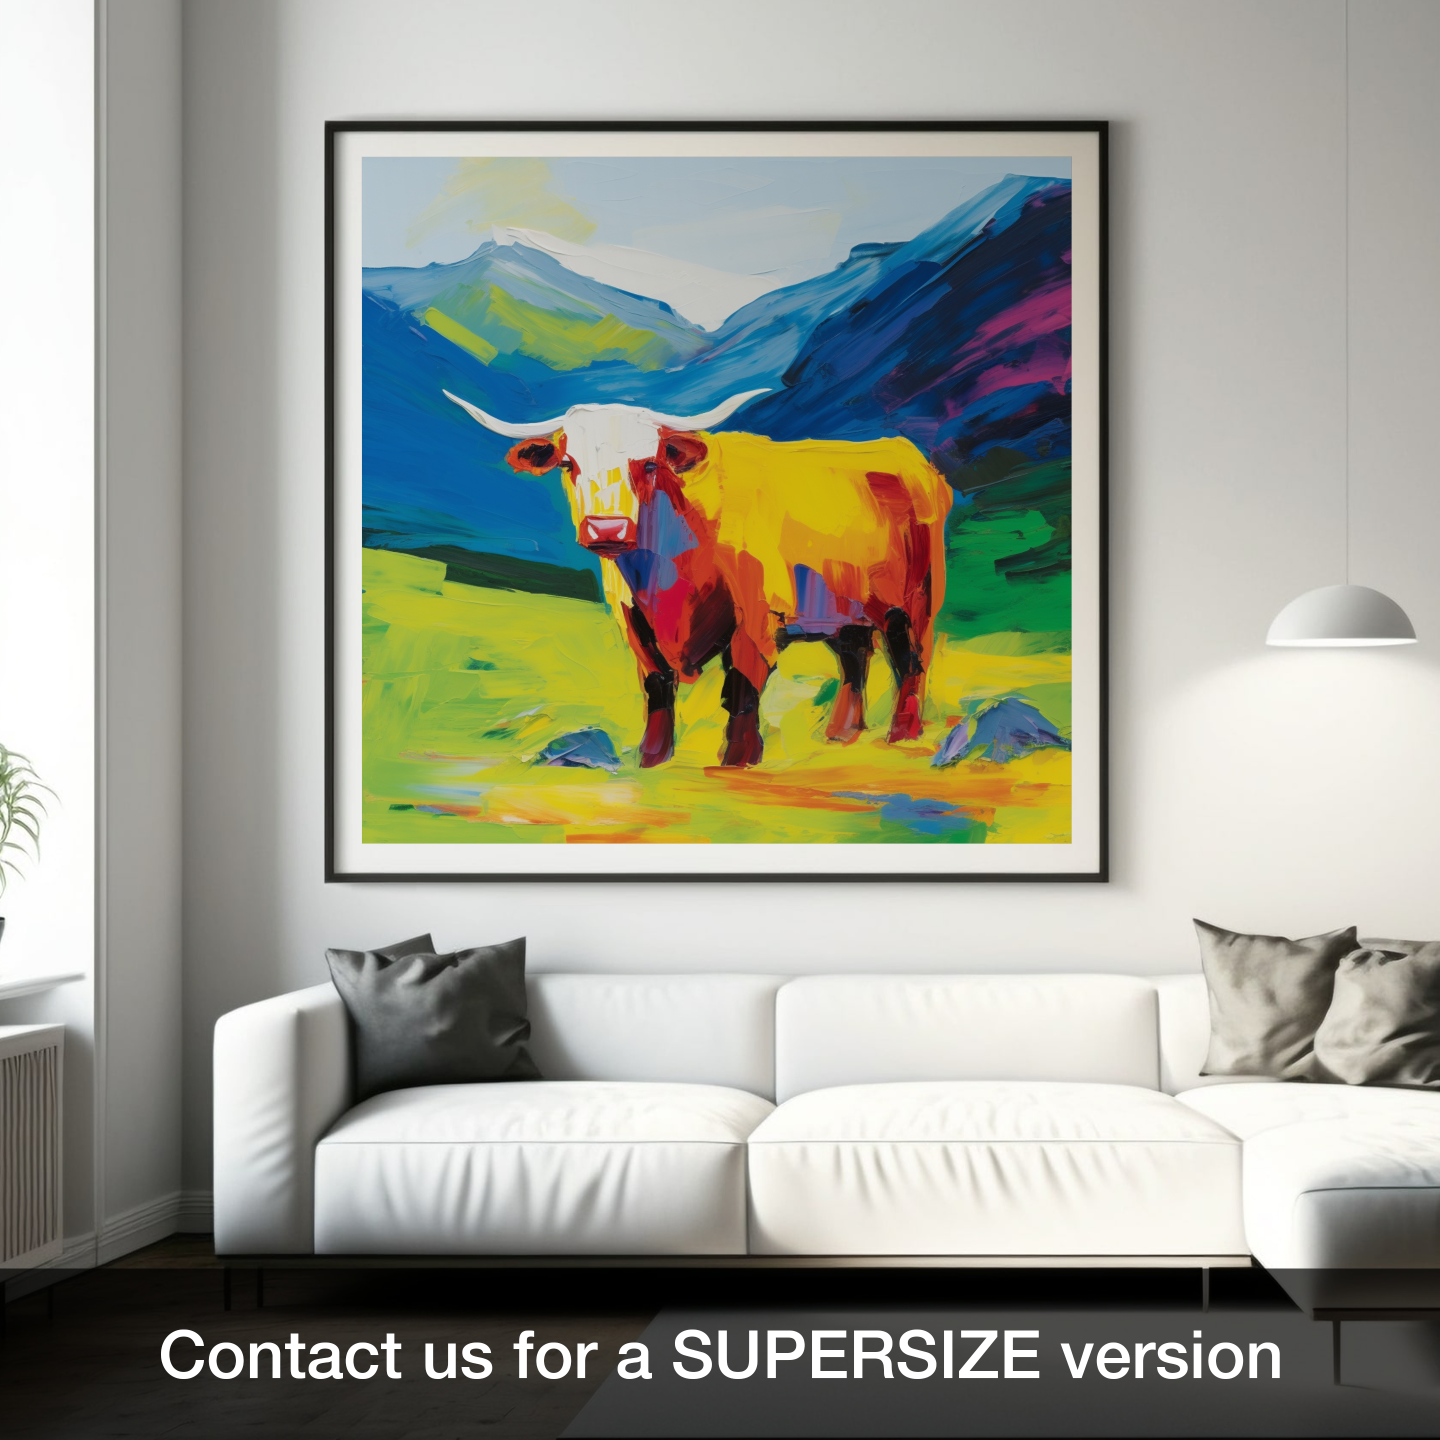 Highland Cow in Glencoe: A Summer's Abstraction